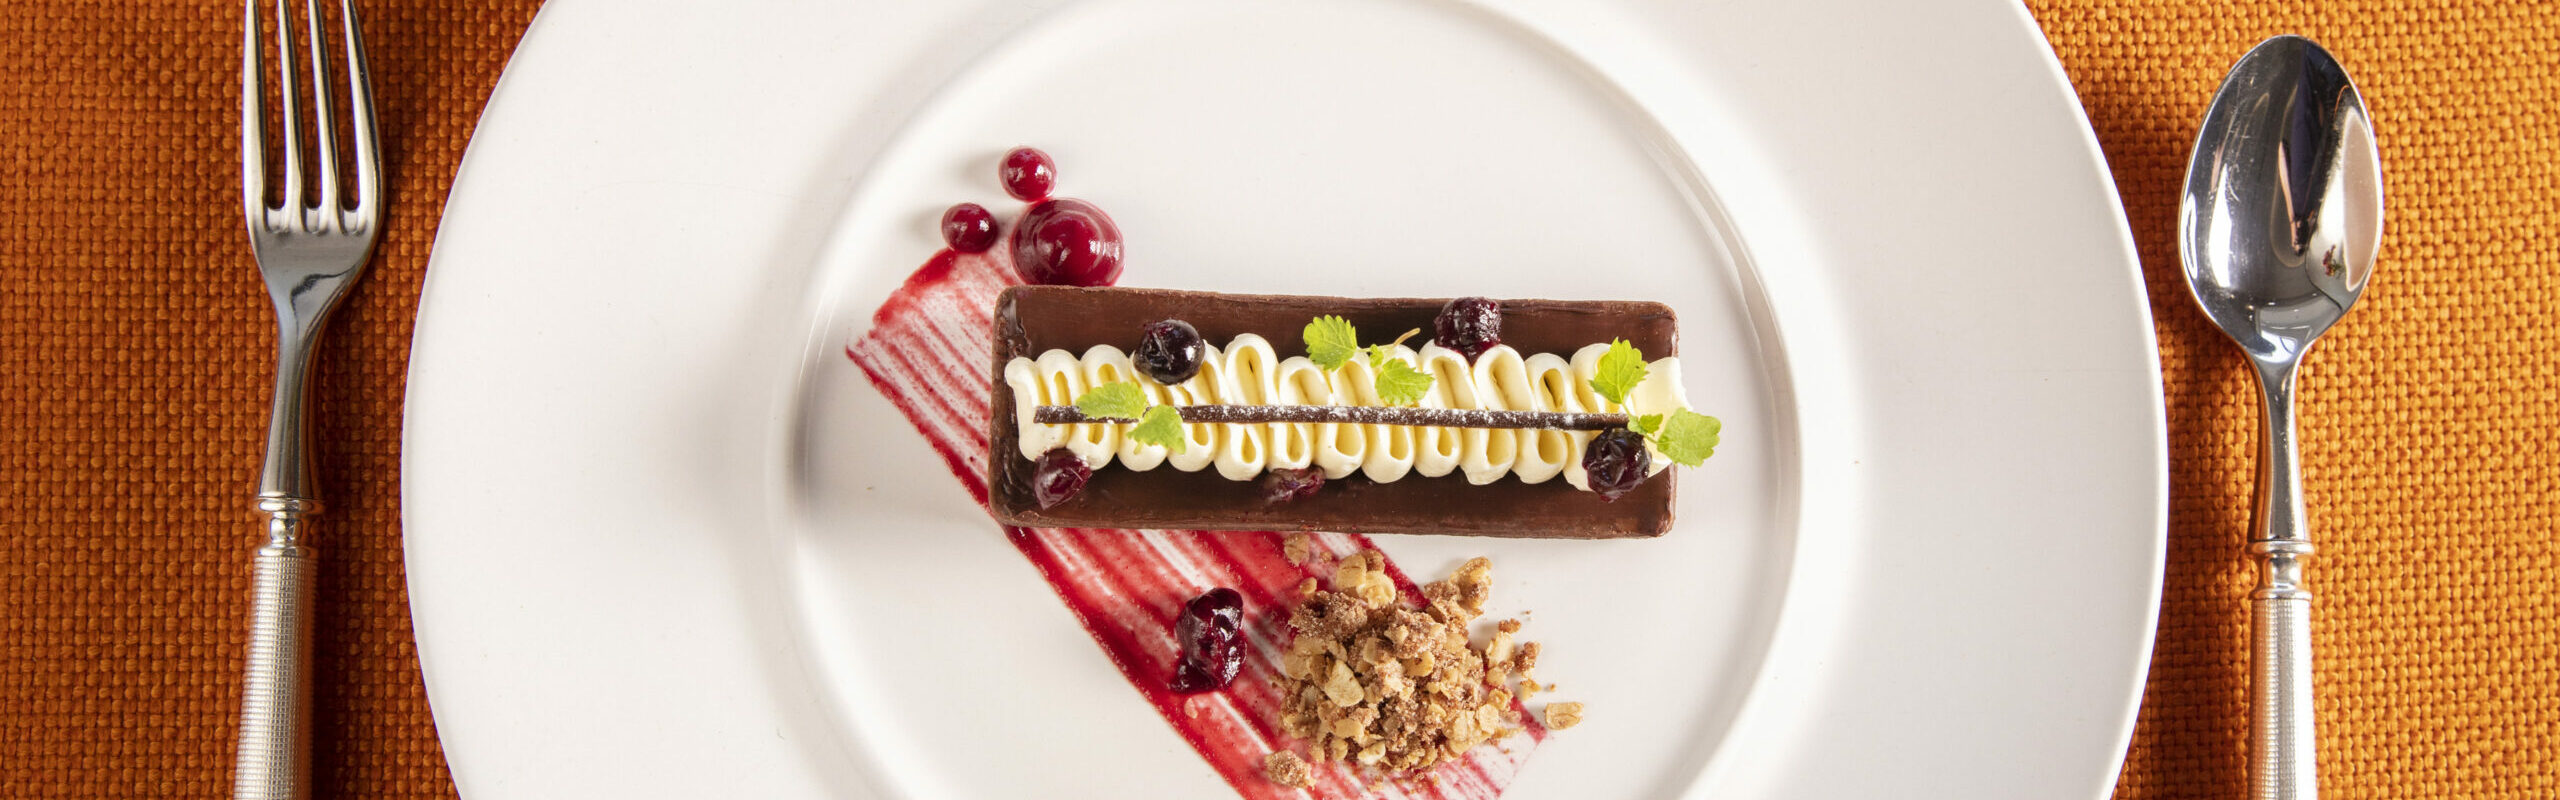 Black forest gateau, cherry compote, Madagascan vanilla Chantilly, chocolate sable